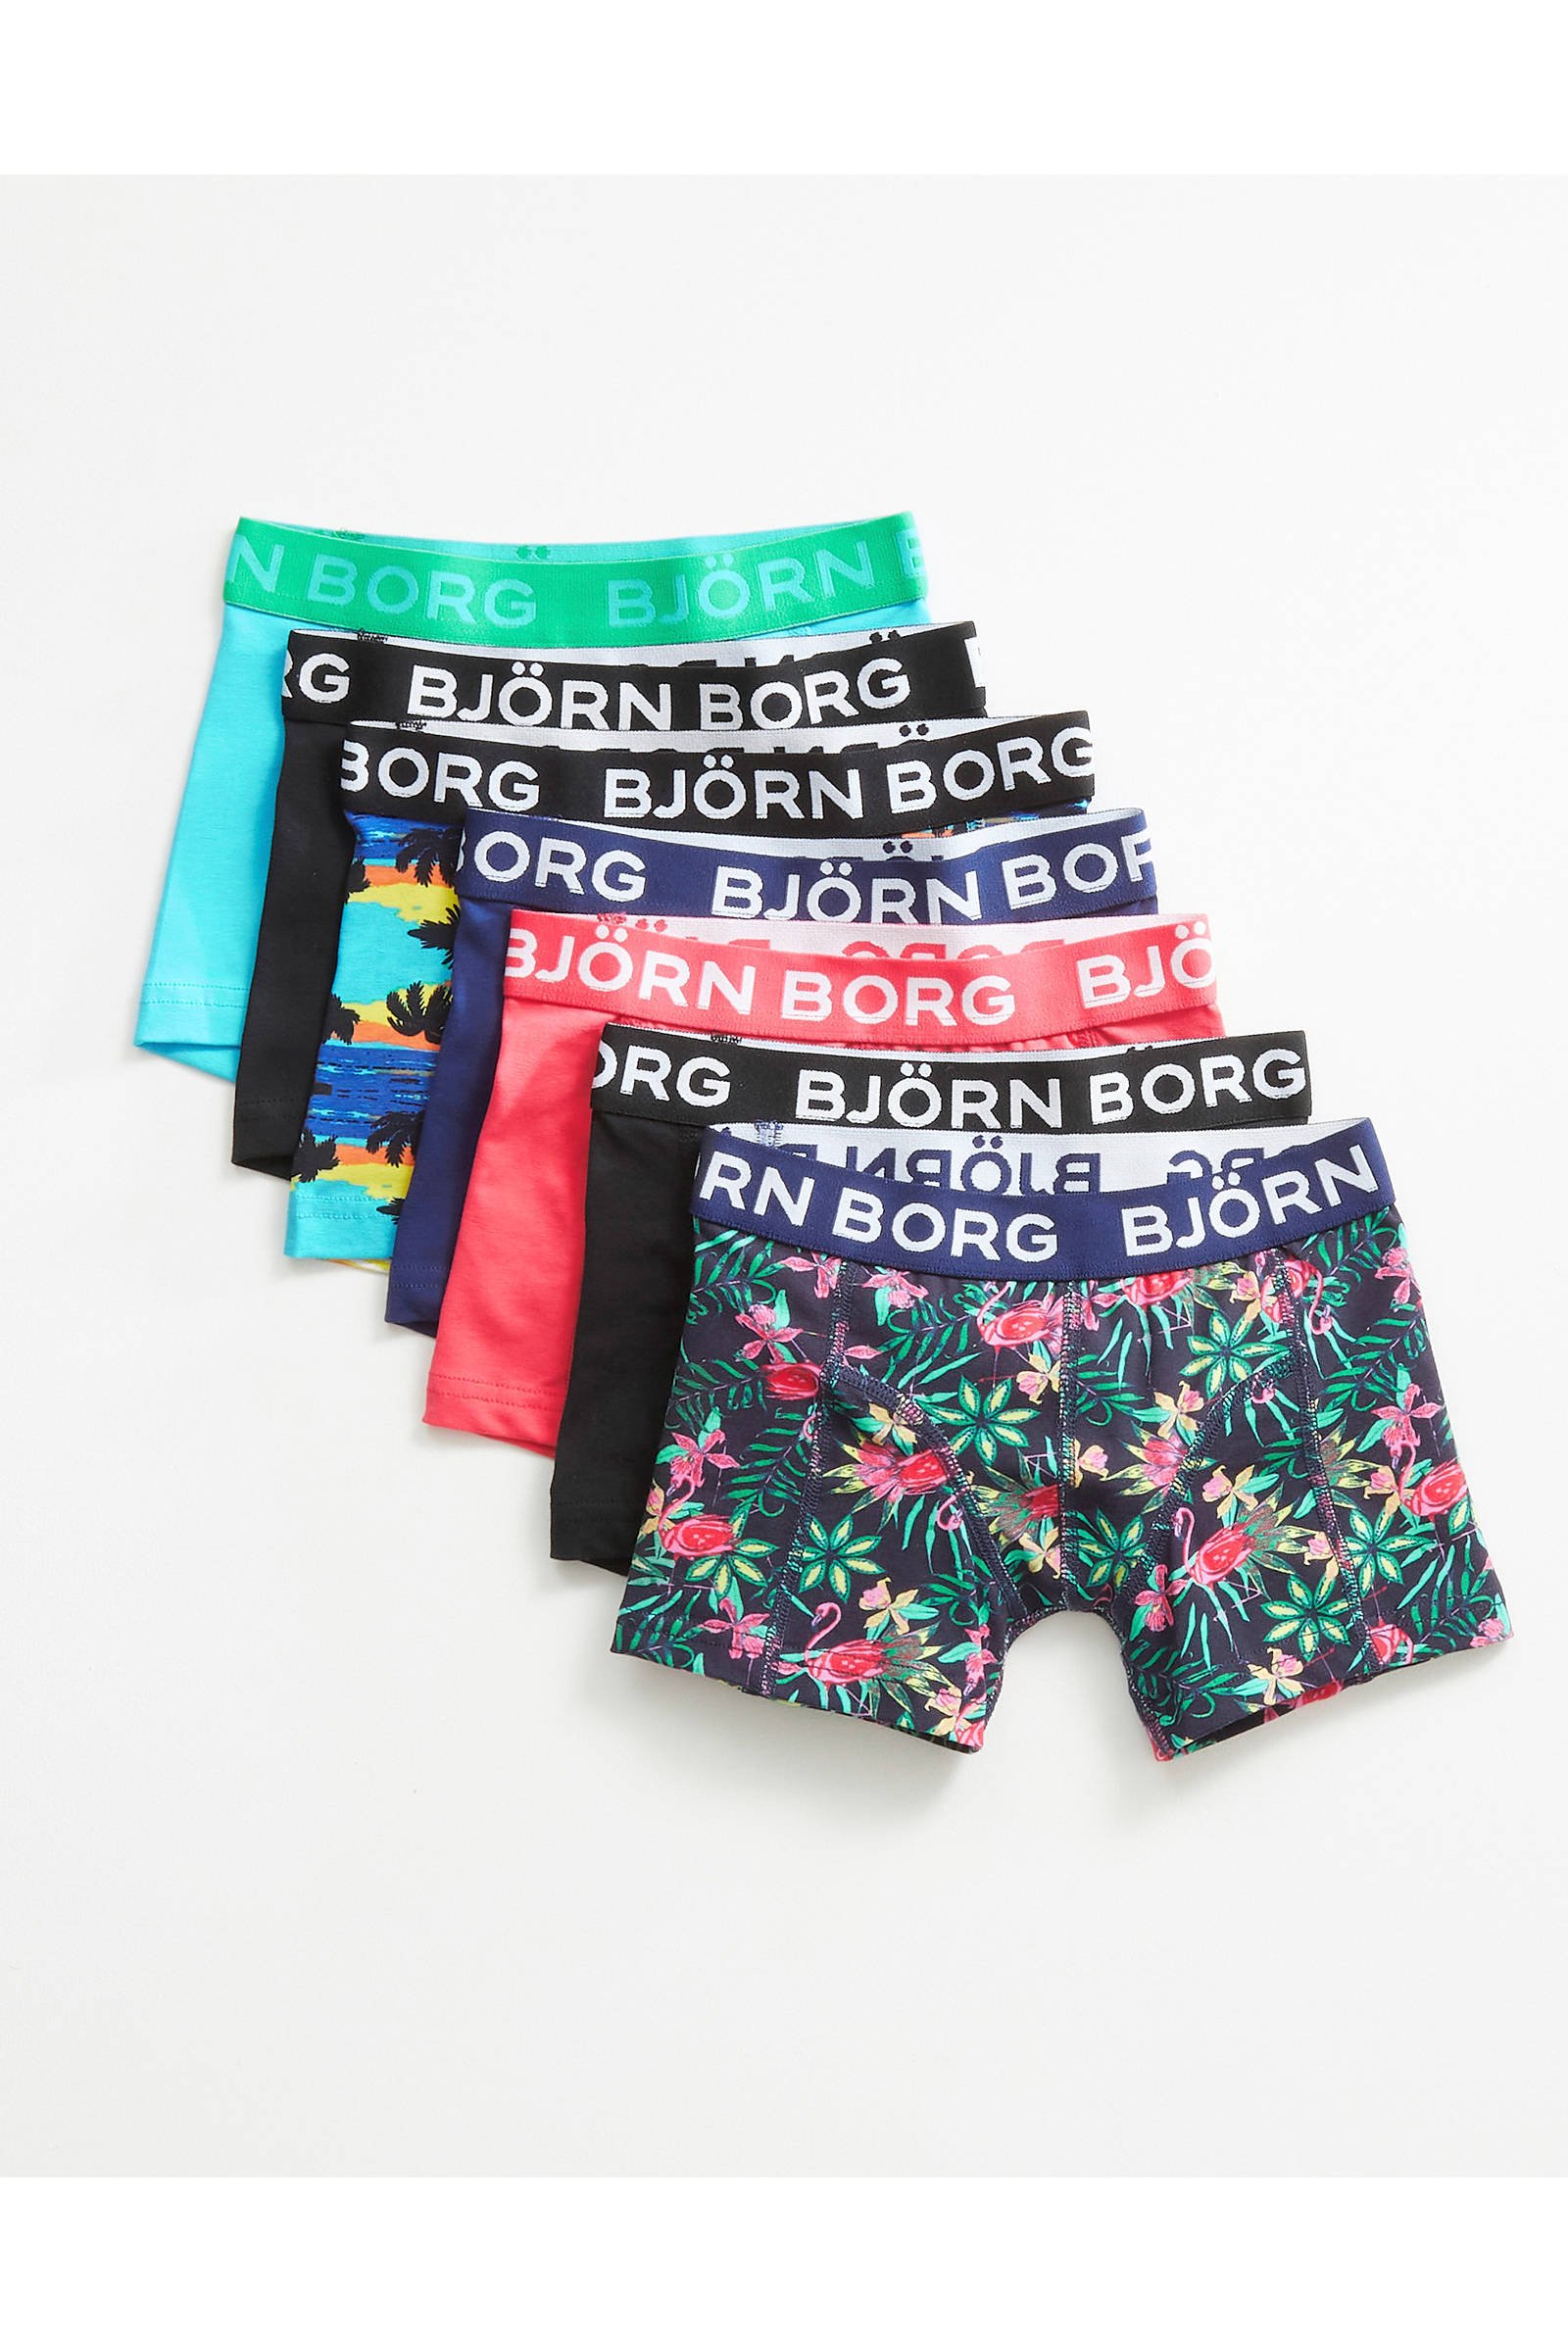 Björn Borg Boxer Hot Sale, UP TO 56% OFF | grup-policlinic.com